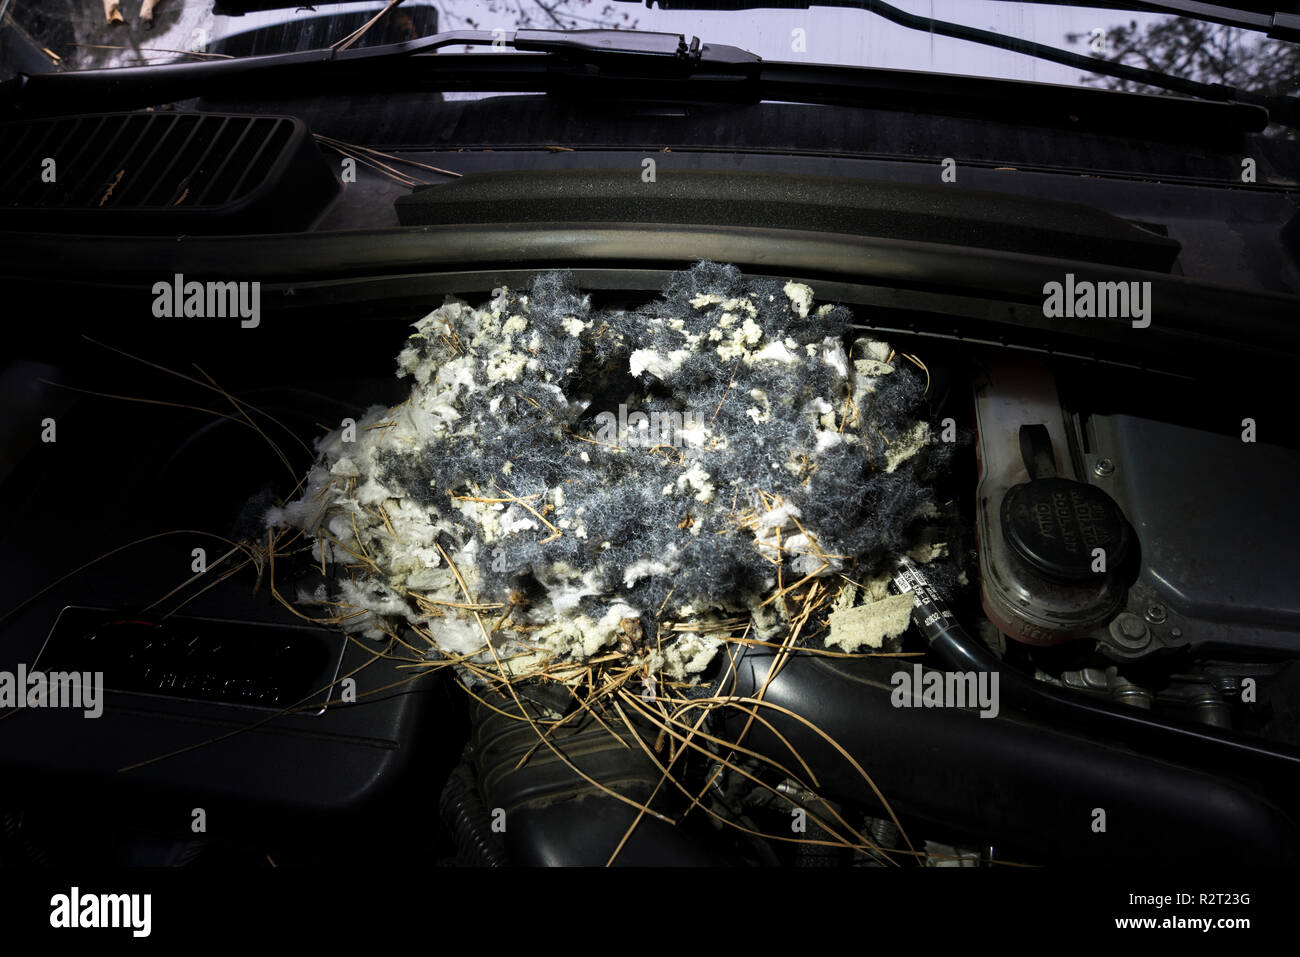 A large, perfectly crafted pack rat nest under the hood of a car parked outdoors in a forested area. Stock Photo